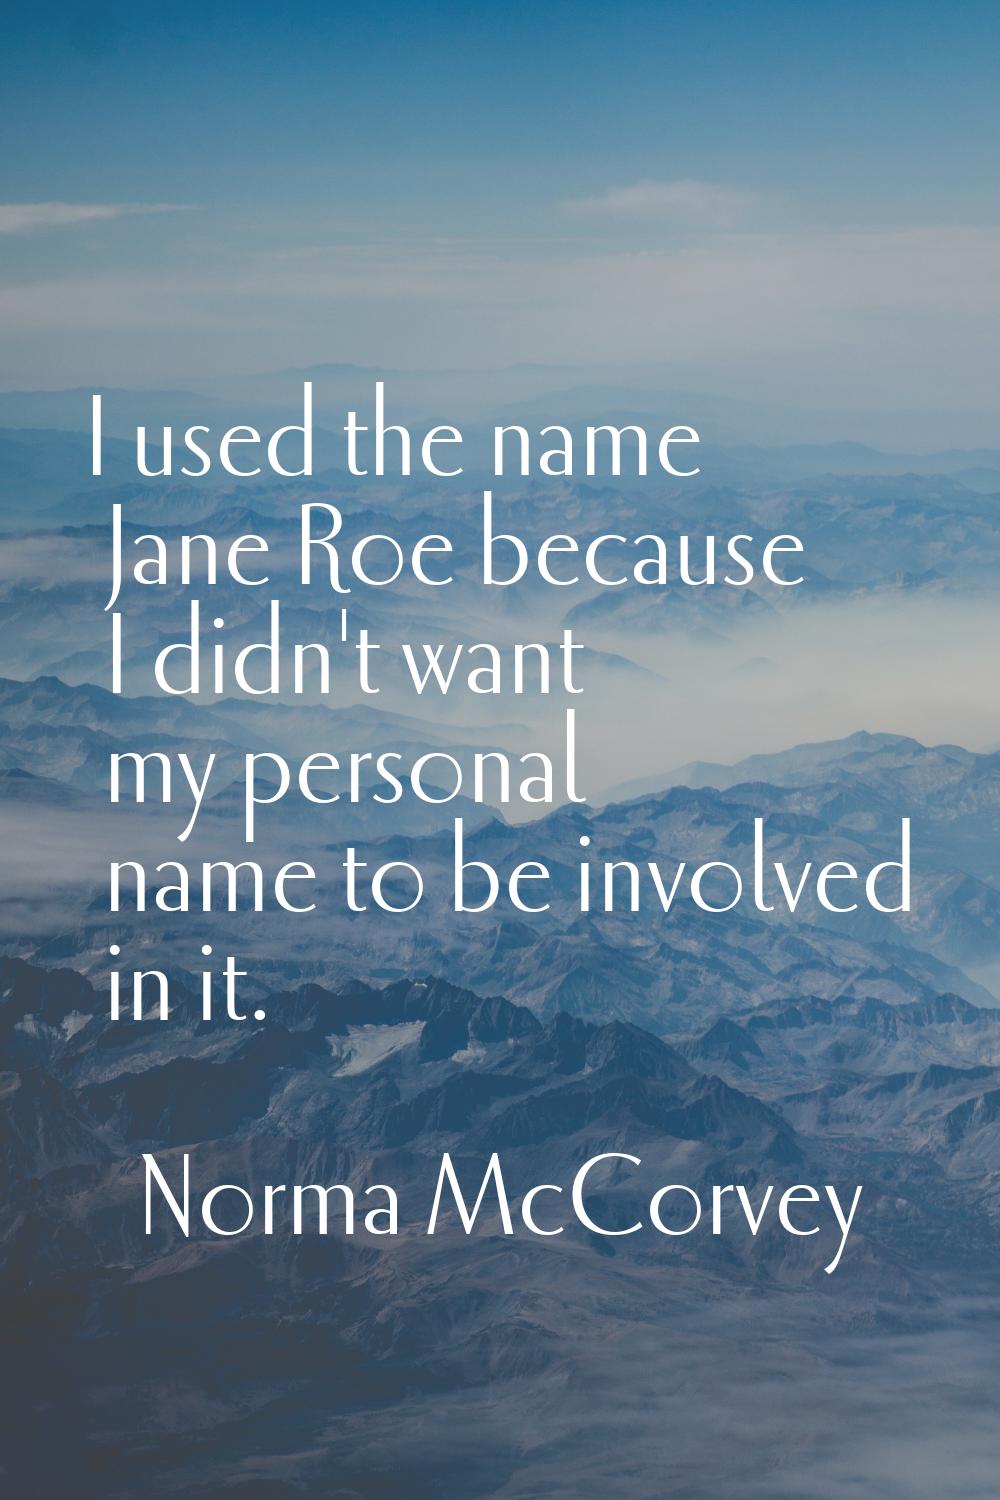 I used the name Jane Roe because I didn't want my personal name to be involved in it.